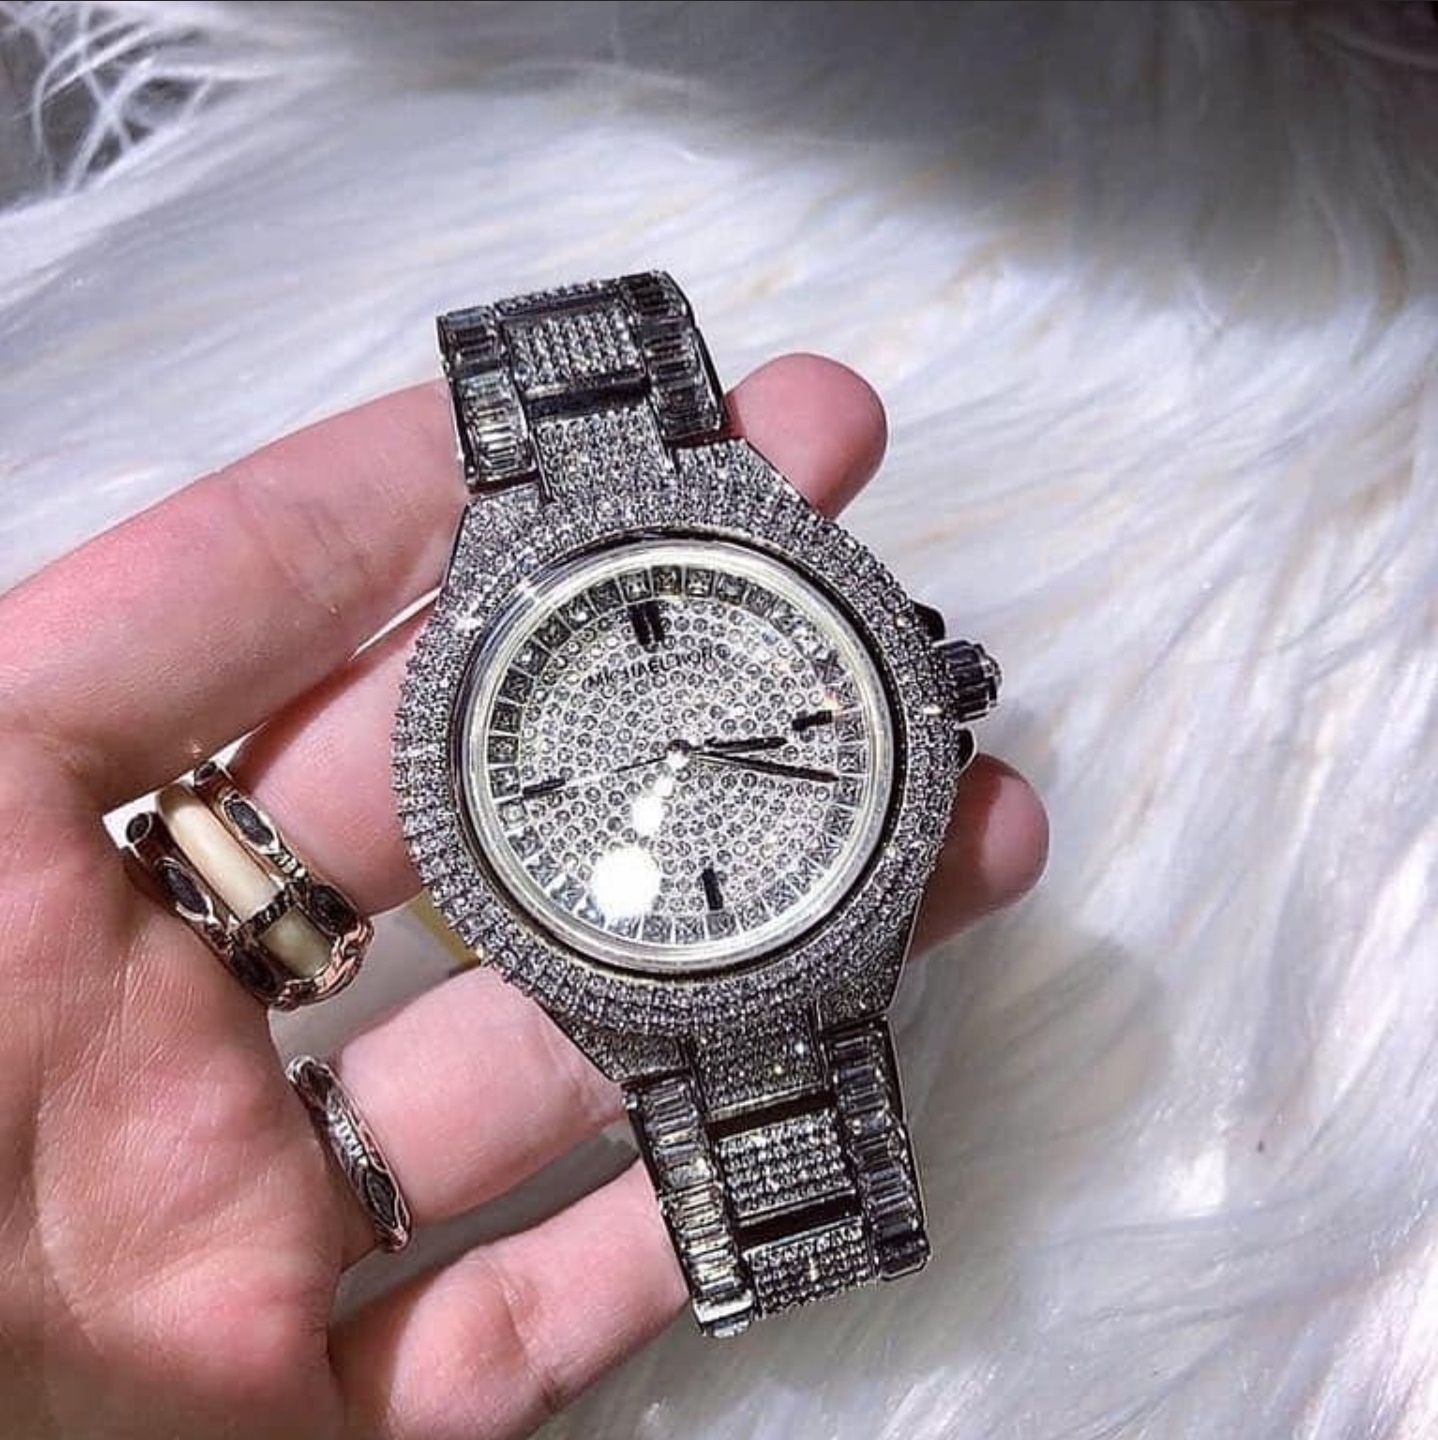 Brand New Authentic Michael Kors Watch Icedout for Sale in Littleton CO   OfferUp